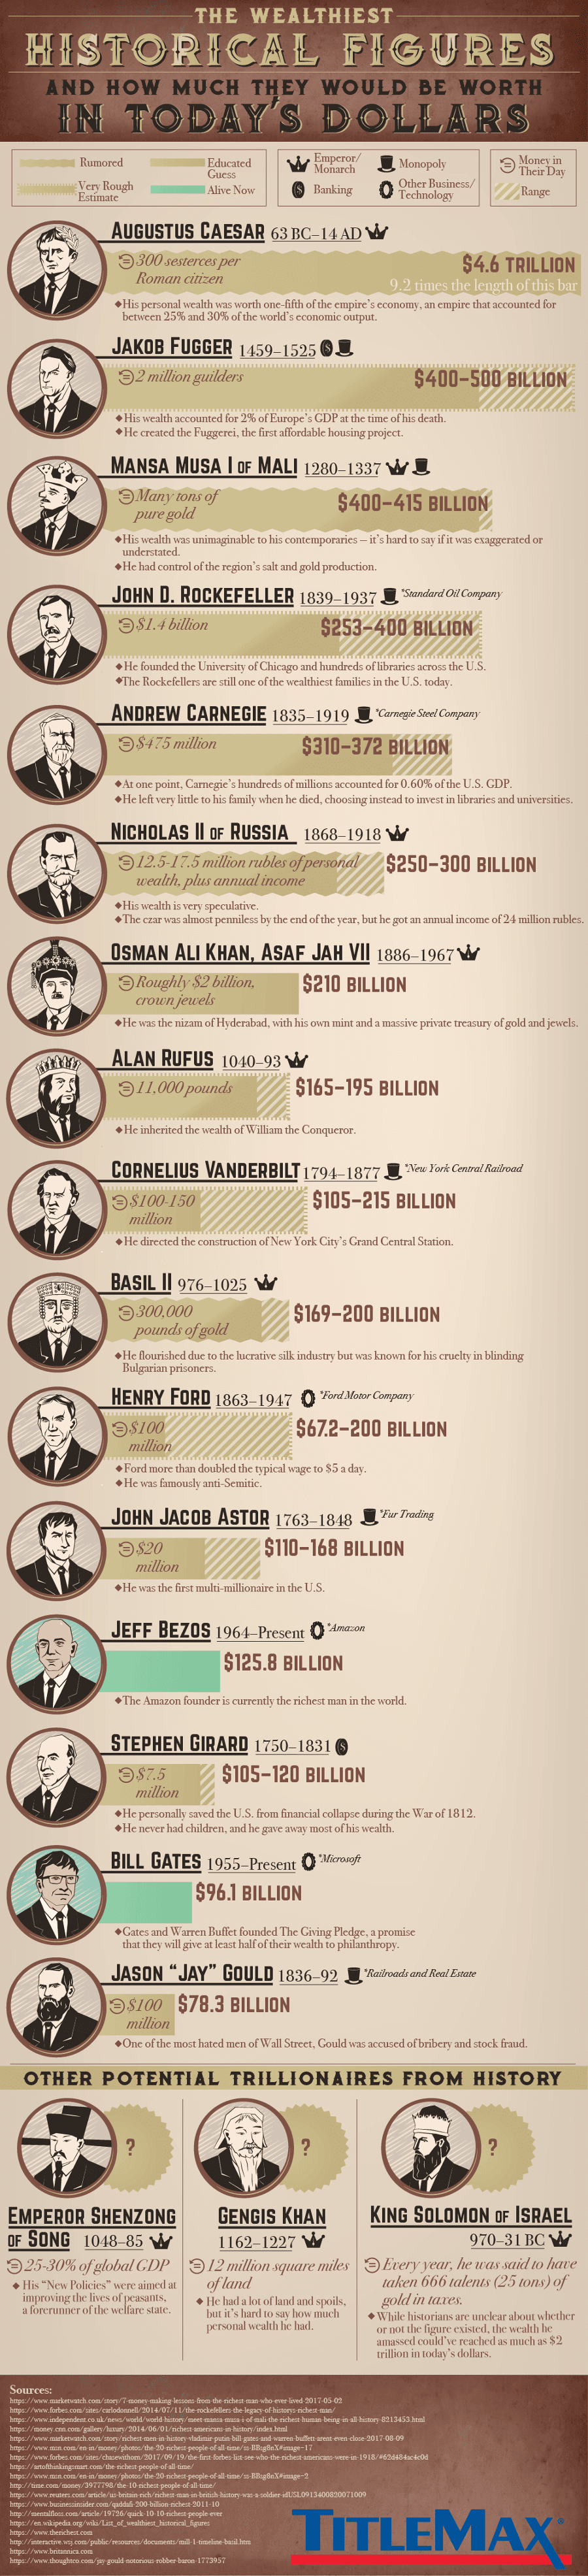 History’s Wealthiest & How Much They Would Be Worth Today #infographic